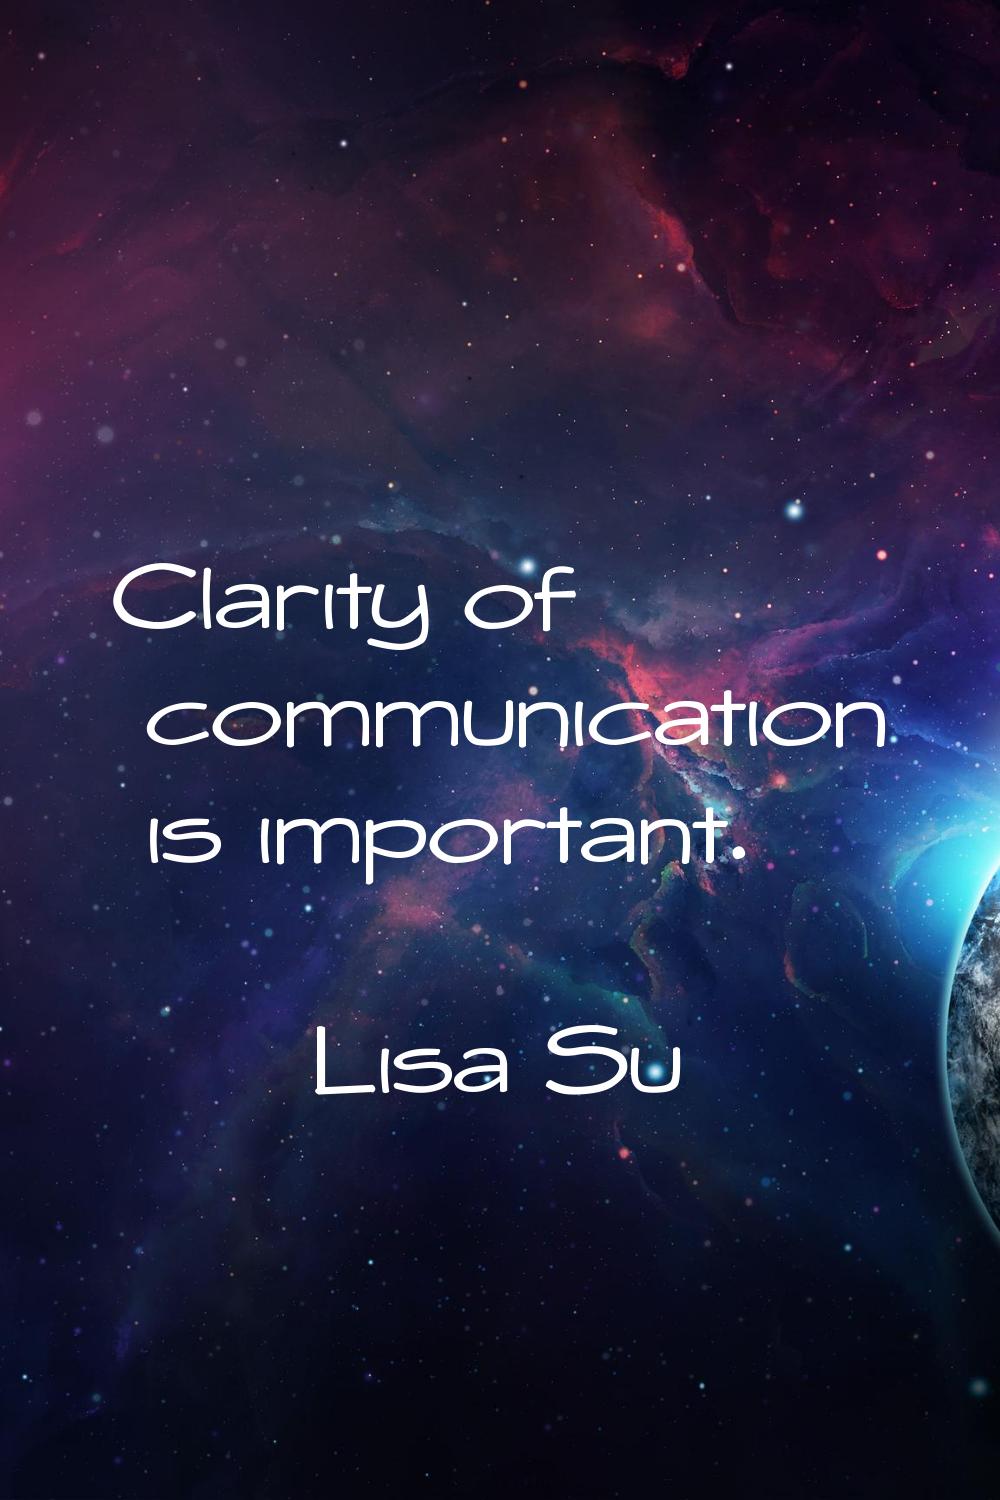 Clarity of communication is important.